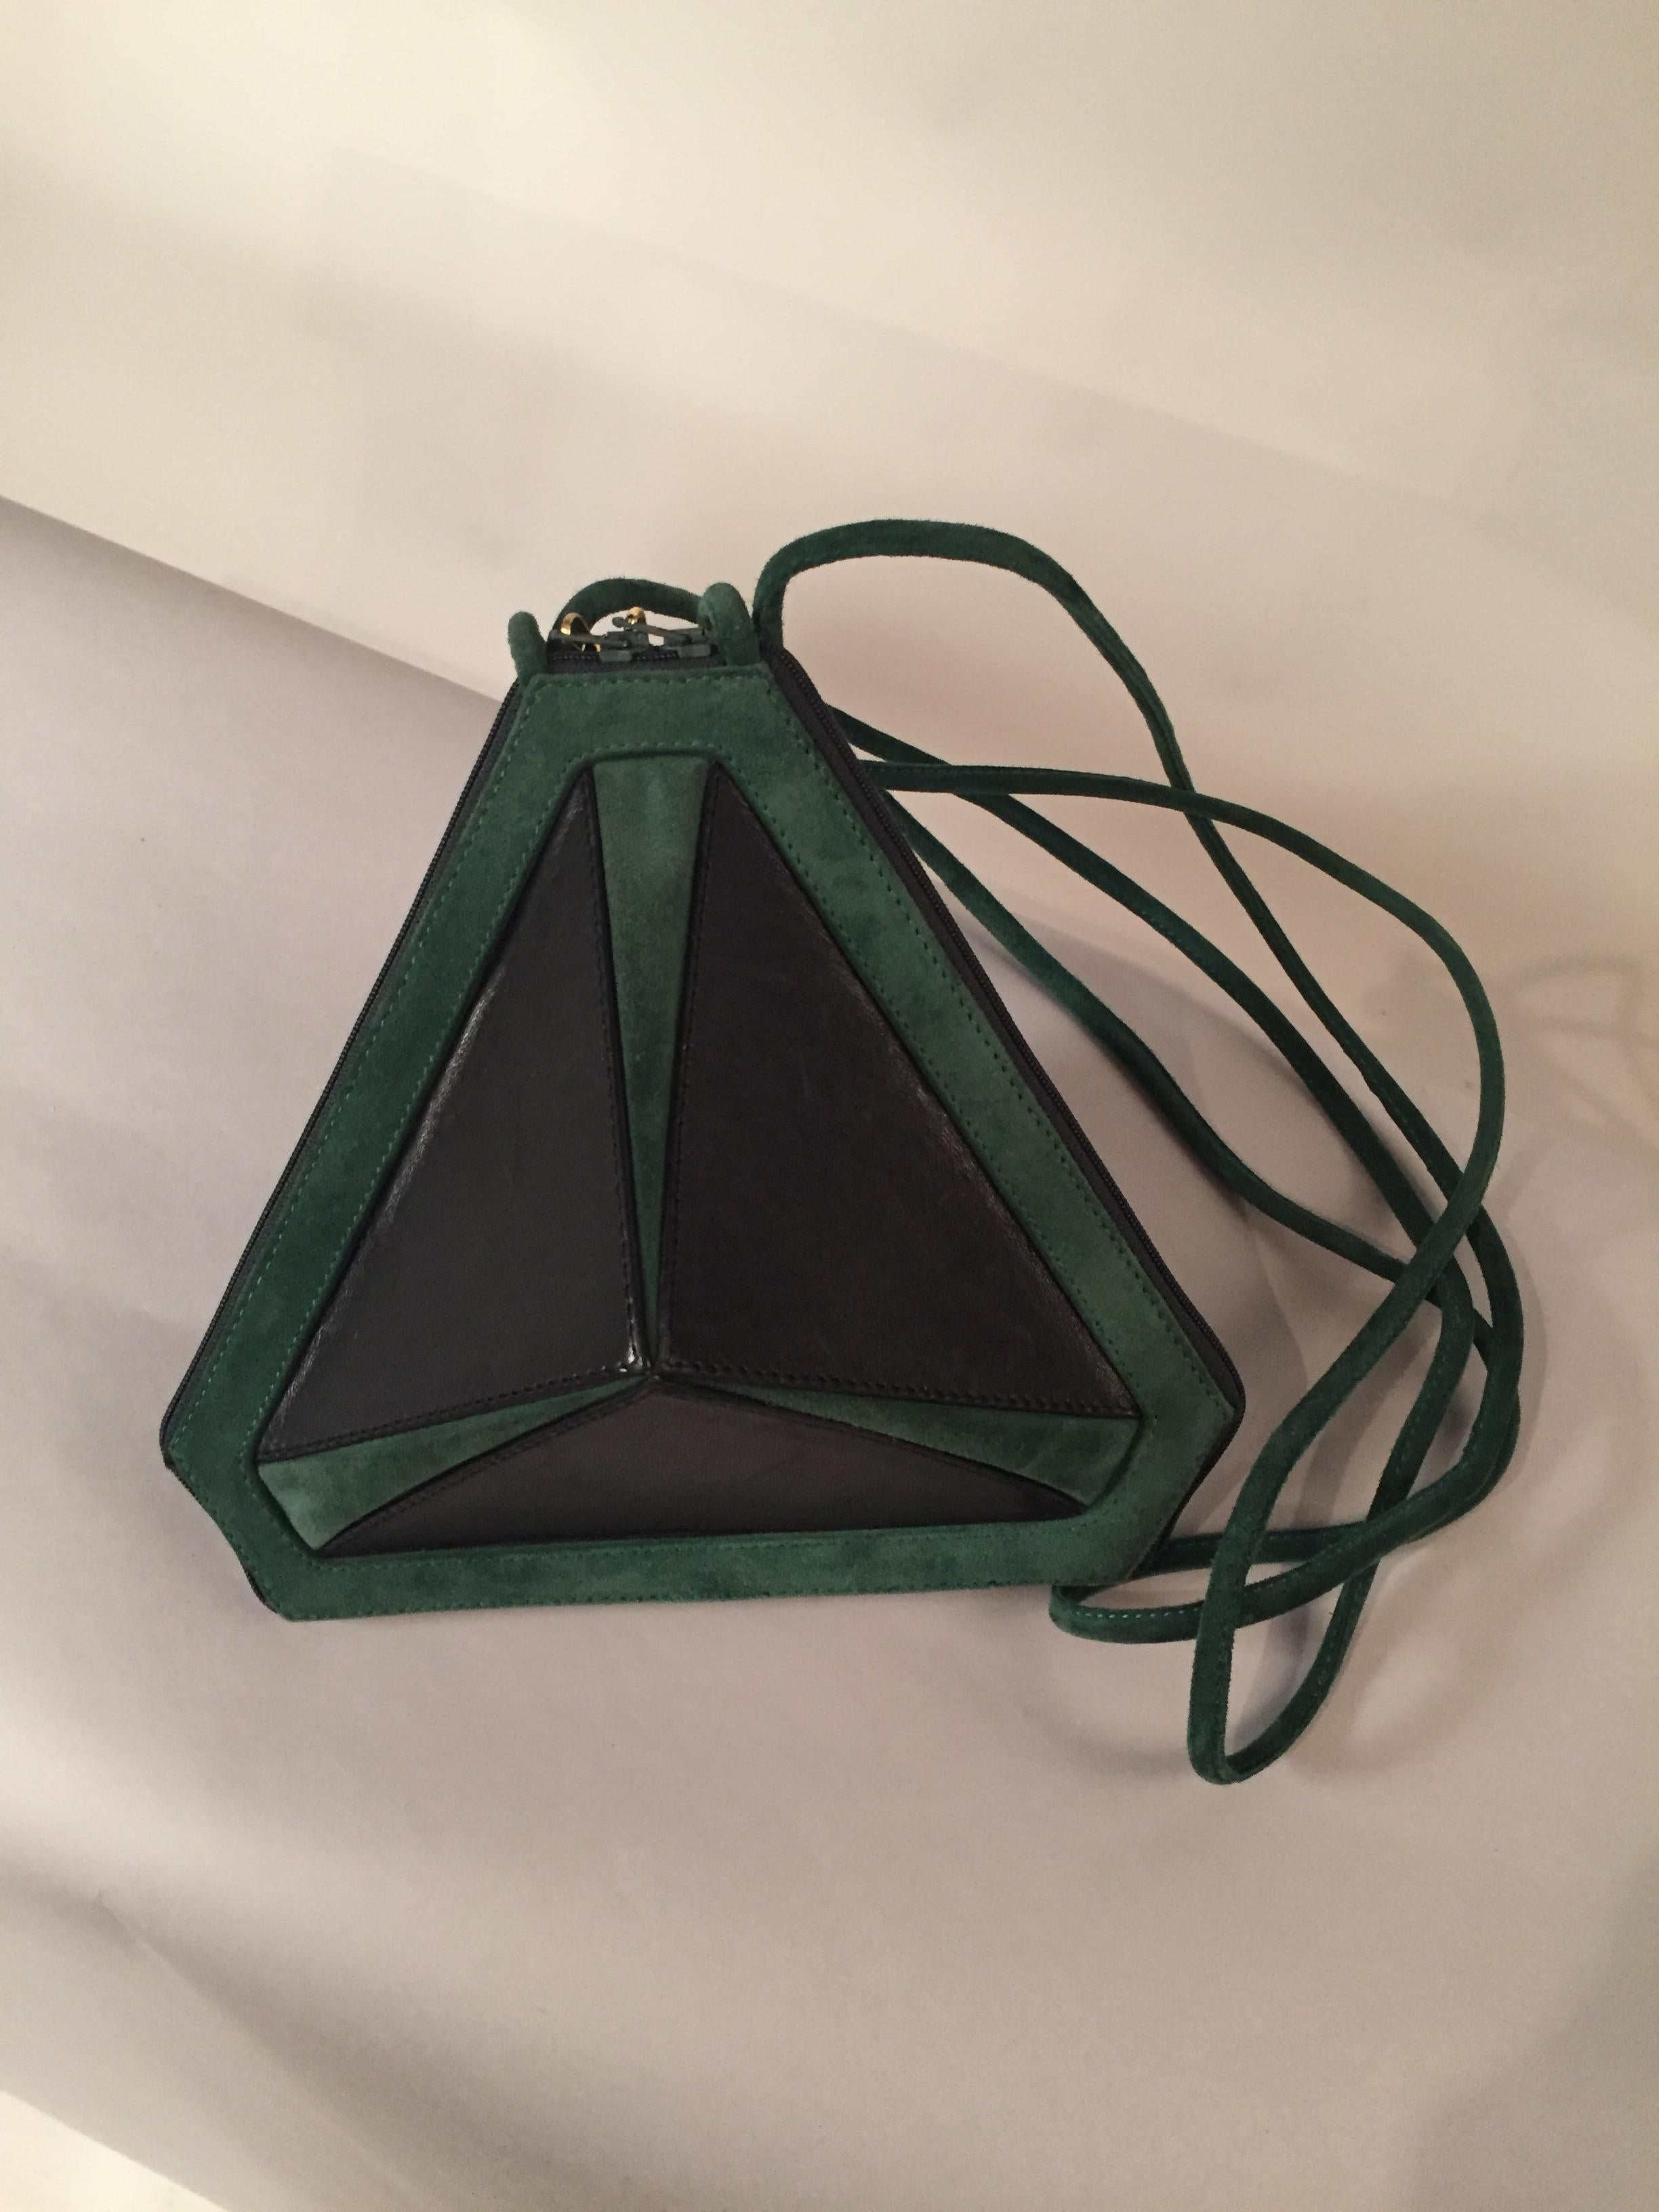 This bag Maud Frizon has the most unusual shape that I have ever seen, all angles and corners, with two zippers at the center with golden high heel zipper pulls. It is a real conversation piece!  The bag is made from black lambskin and forest green